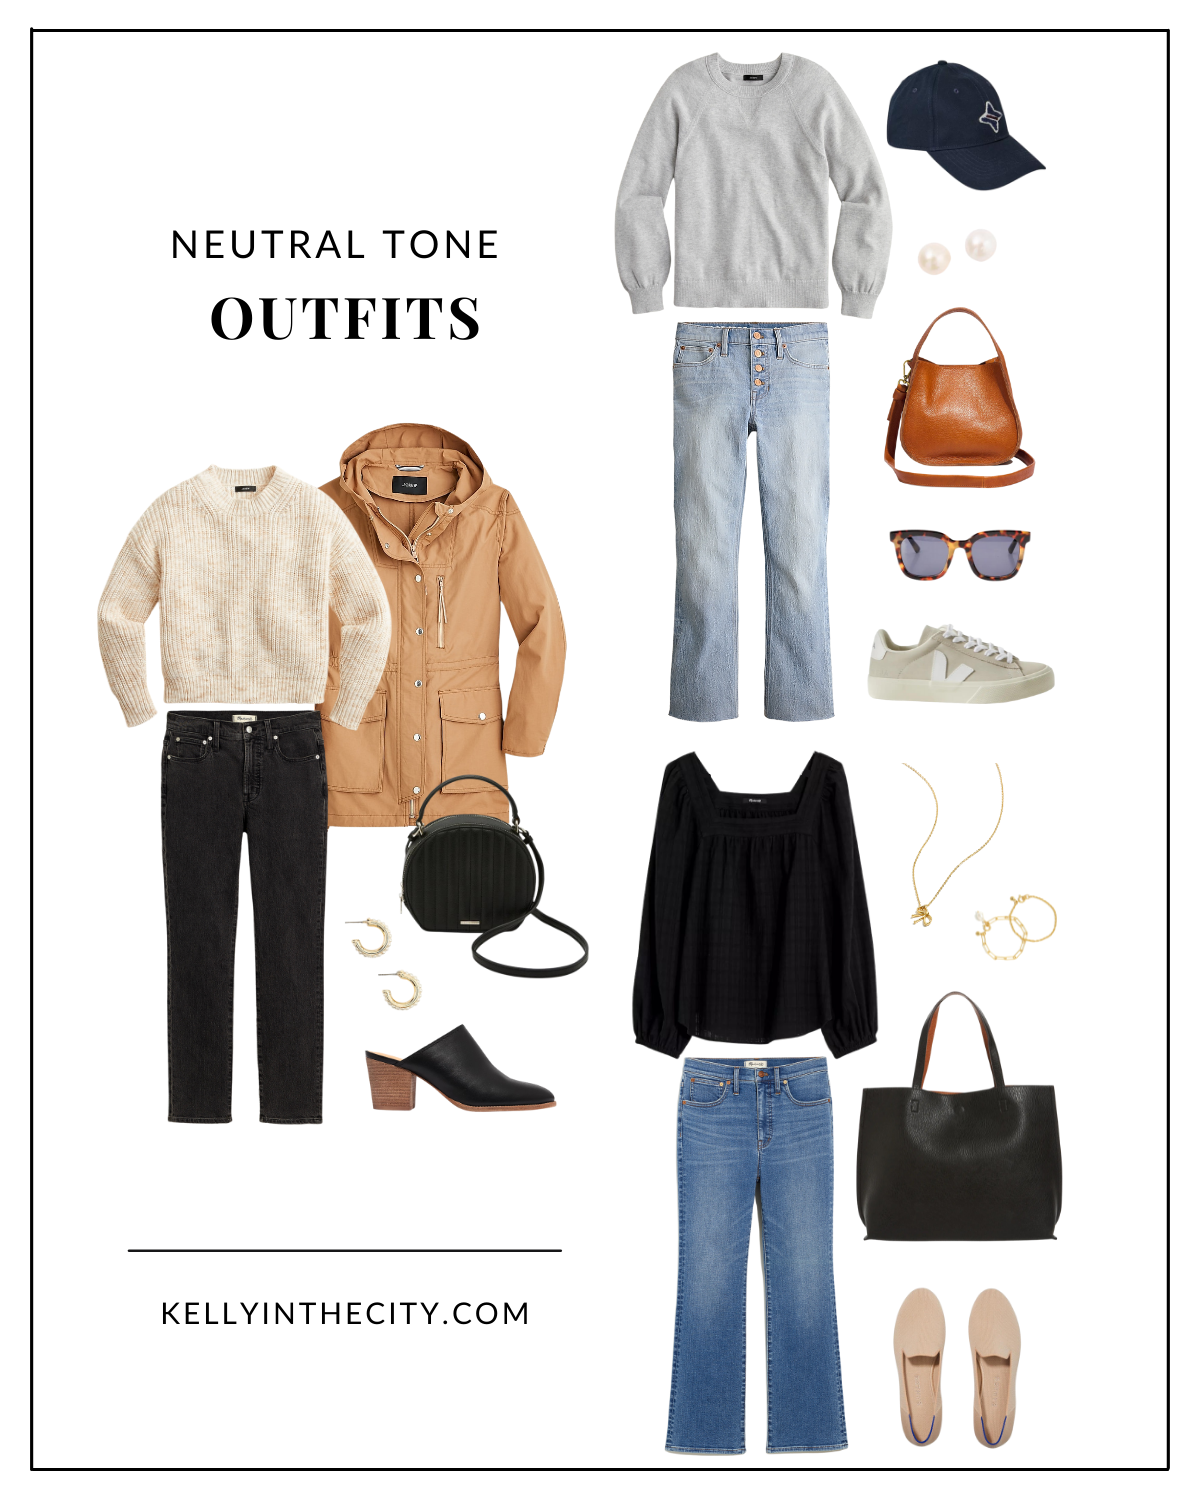 3 Neutral Tone Outfits, Kelly in the City